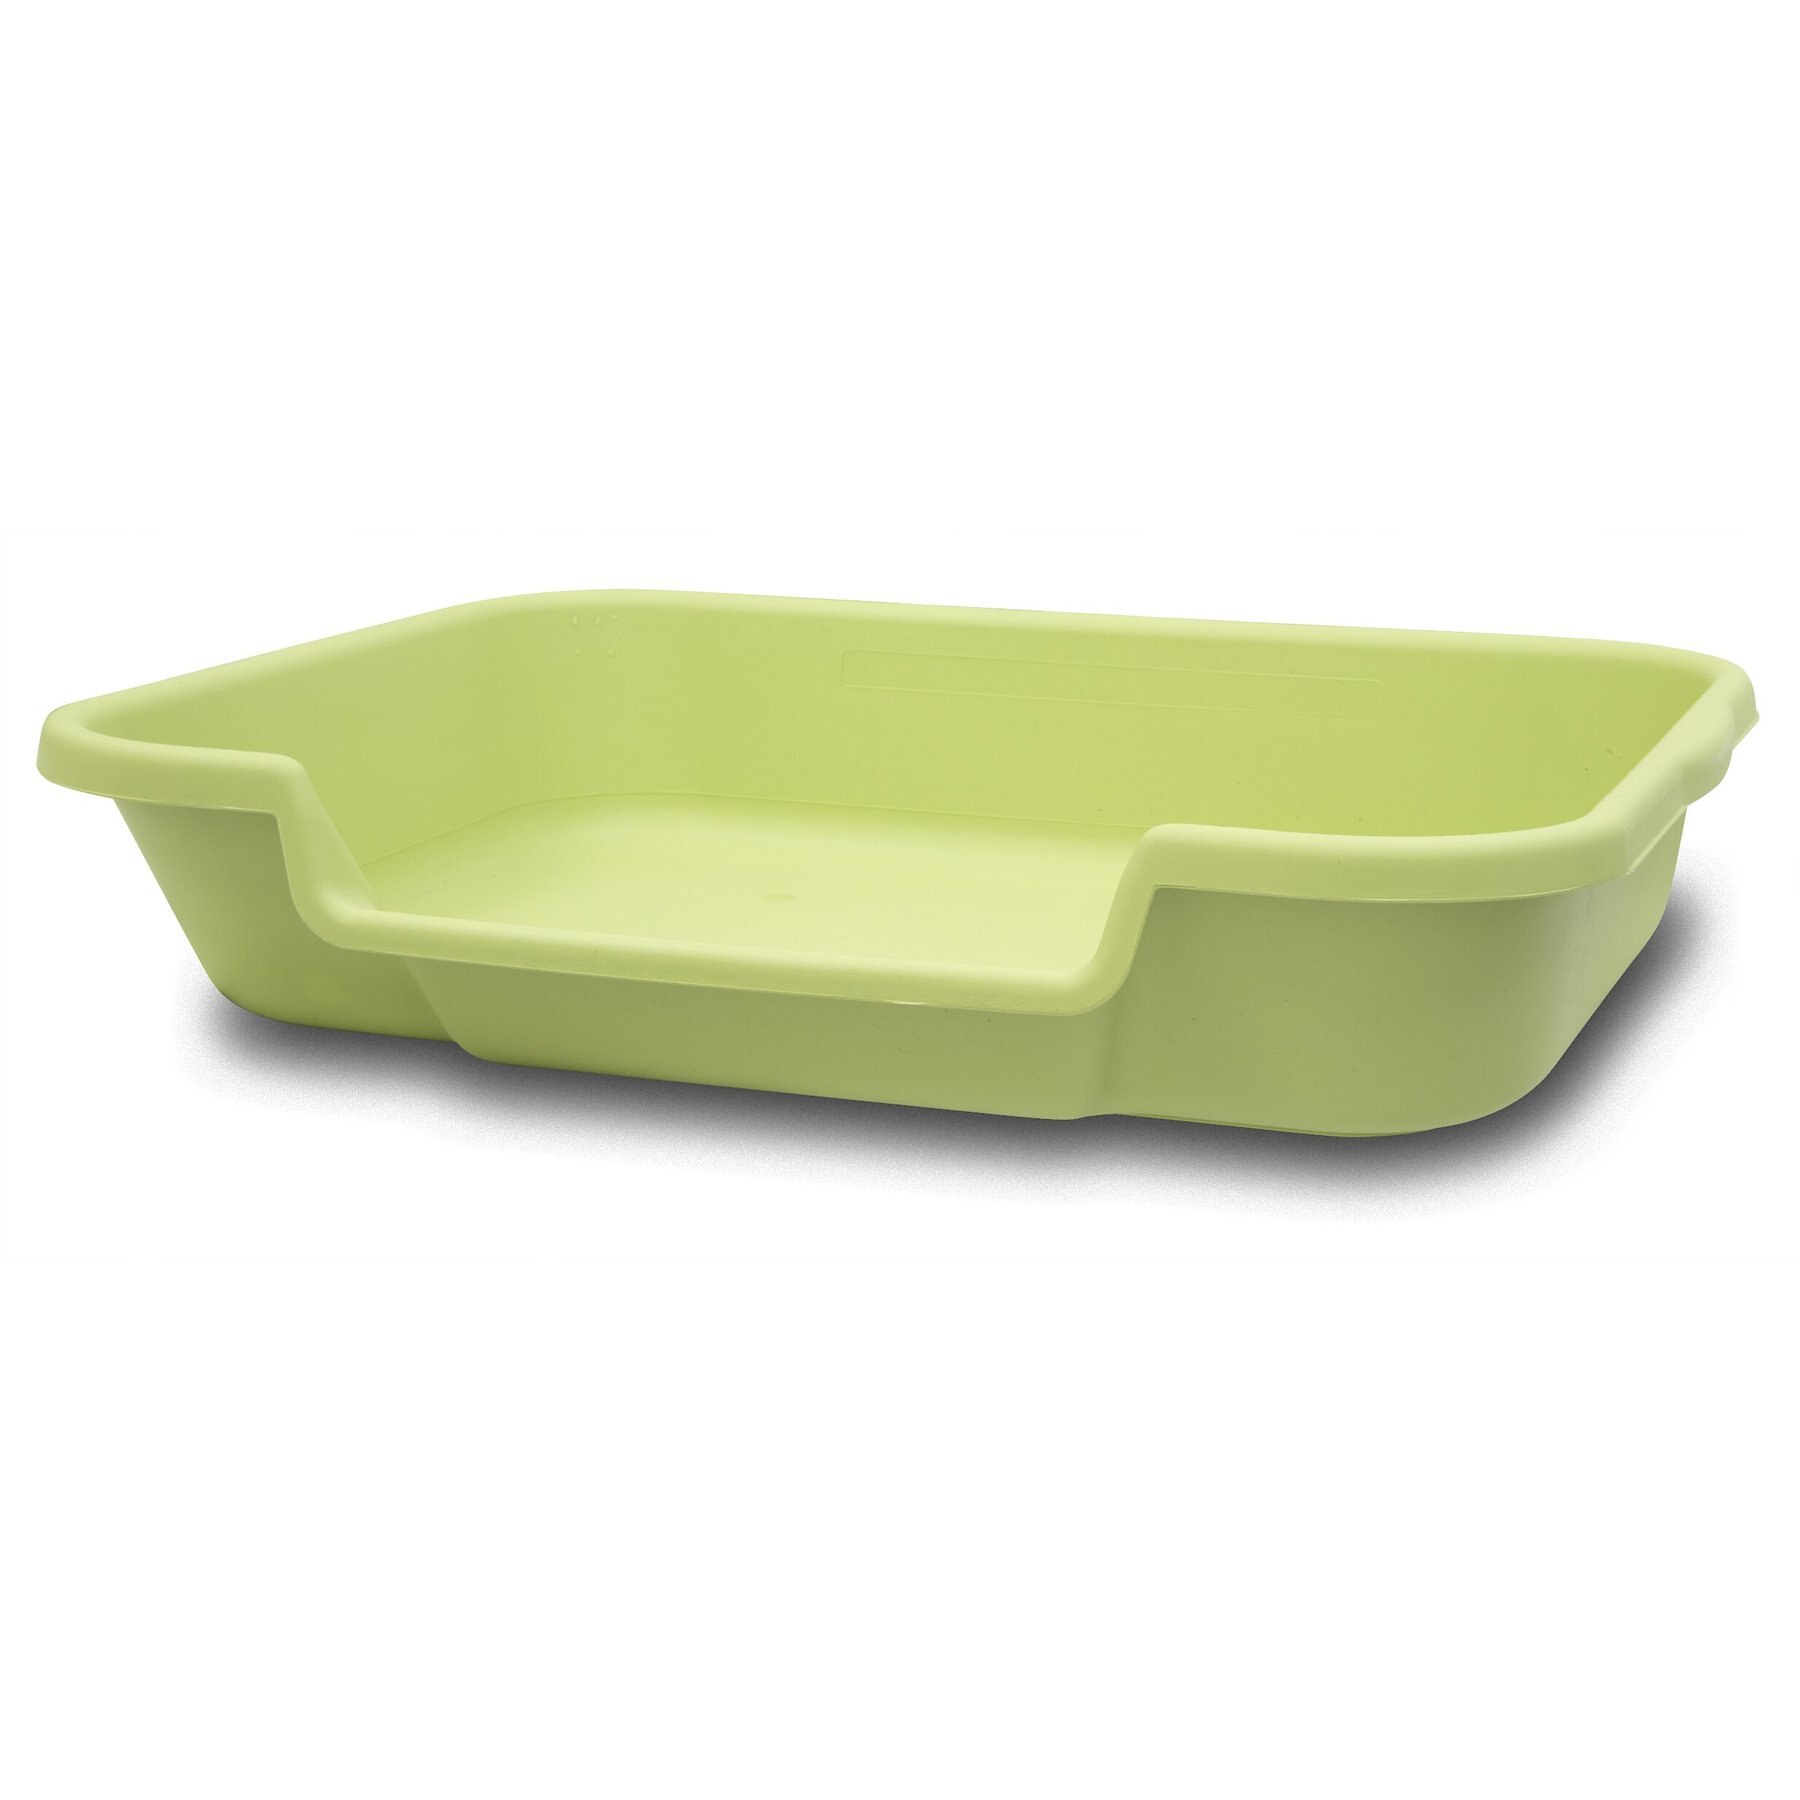 PUPPY PAN Dog, Cat & Small Animal Litter Pan, Green, Large - Chewy.com